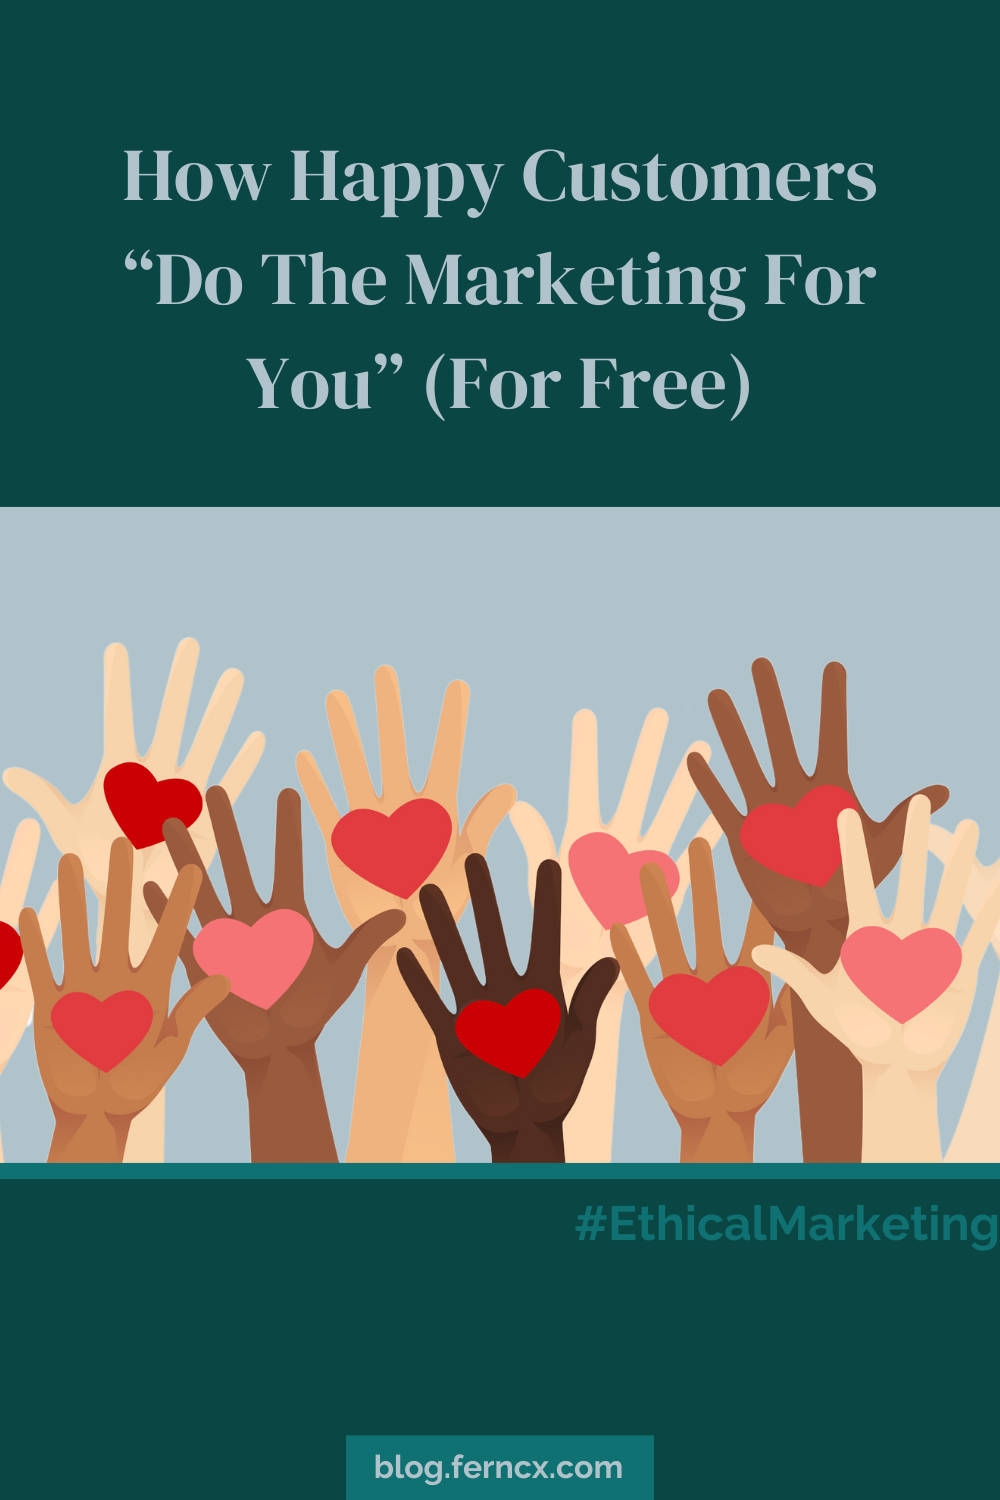 Silver text on green background that says, How Happy Customers Do The Marketing For You (For Free) with an illustration of a crowd of raised hands, each with a heart in the palm representing happy customers.